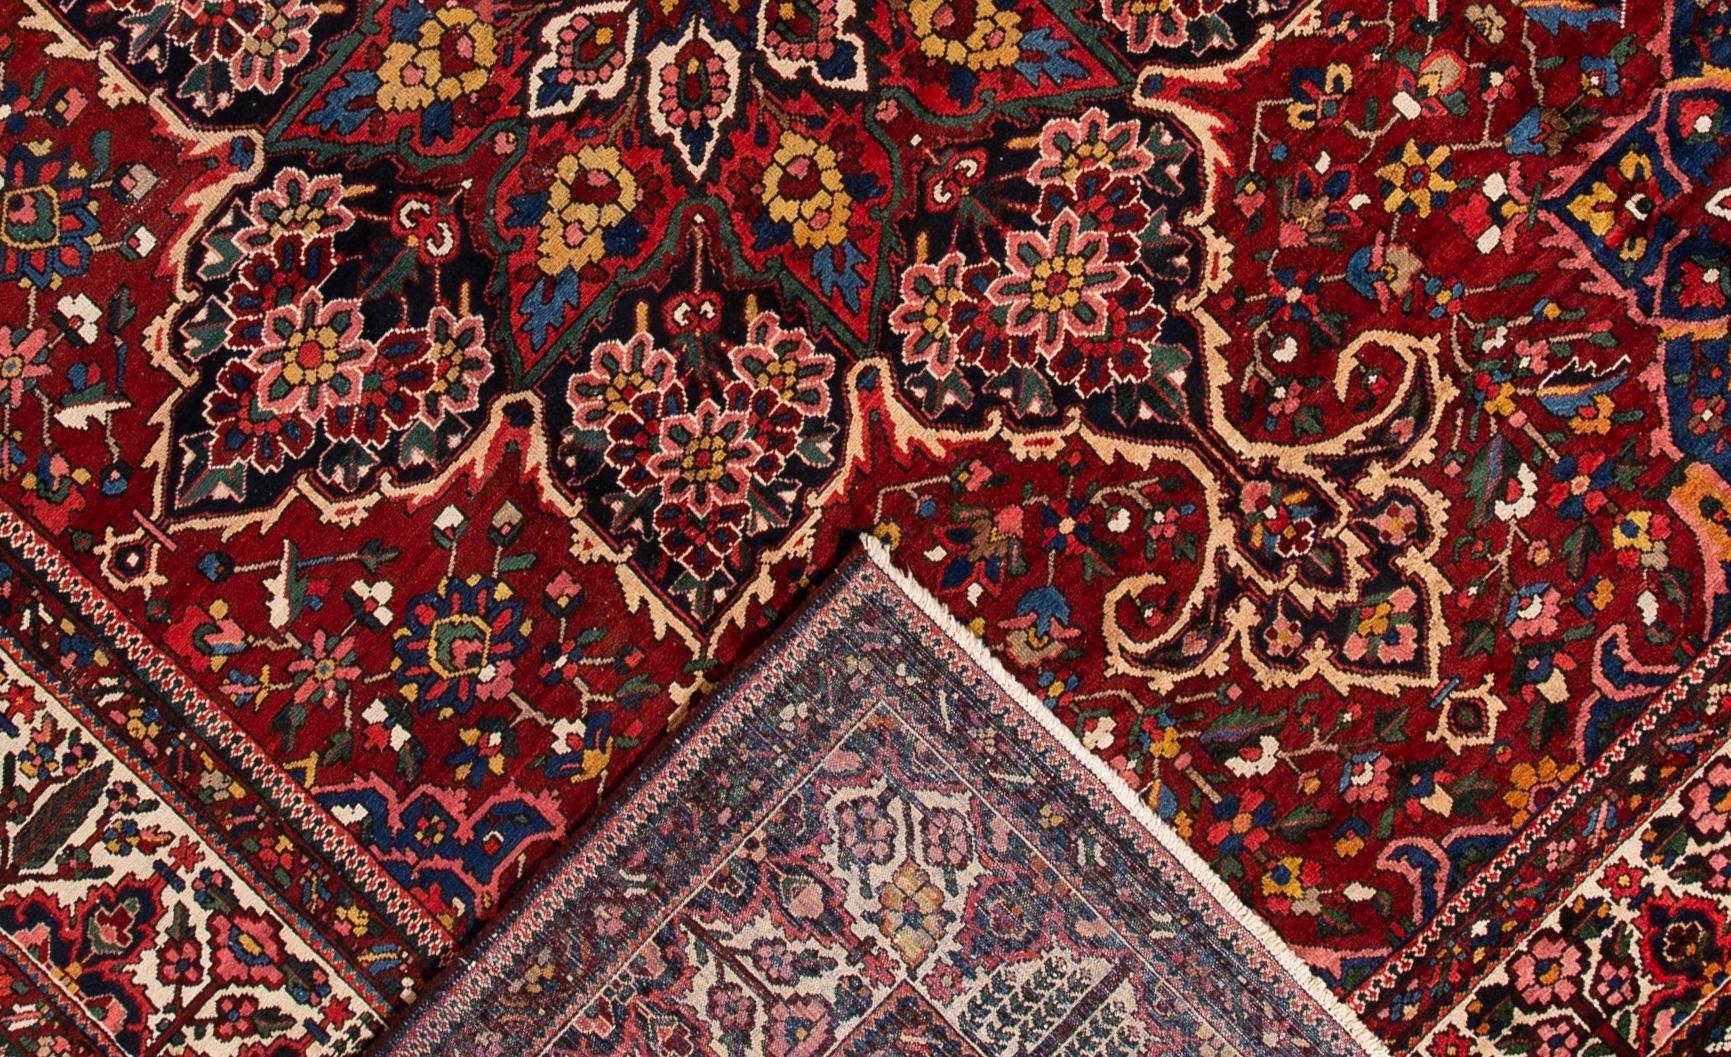 Beautiful Antique Bakhtiari Persian hand-knotted Wool rug with a red field. This Bakhtiari has multi-color accents in a gorgeous all-over medallion floral design.

This rug measures 11'5